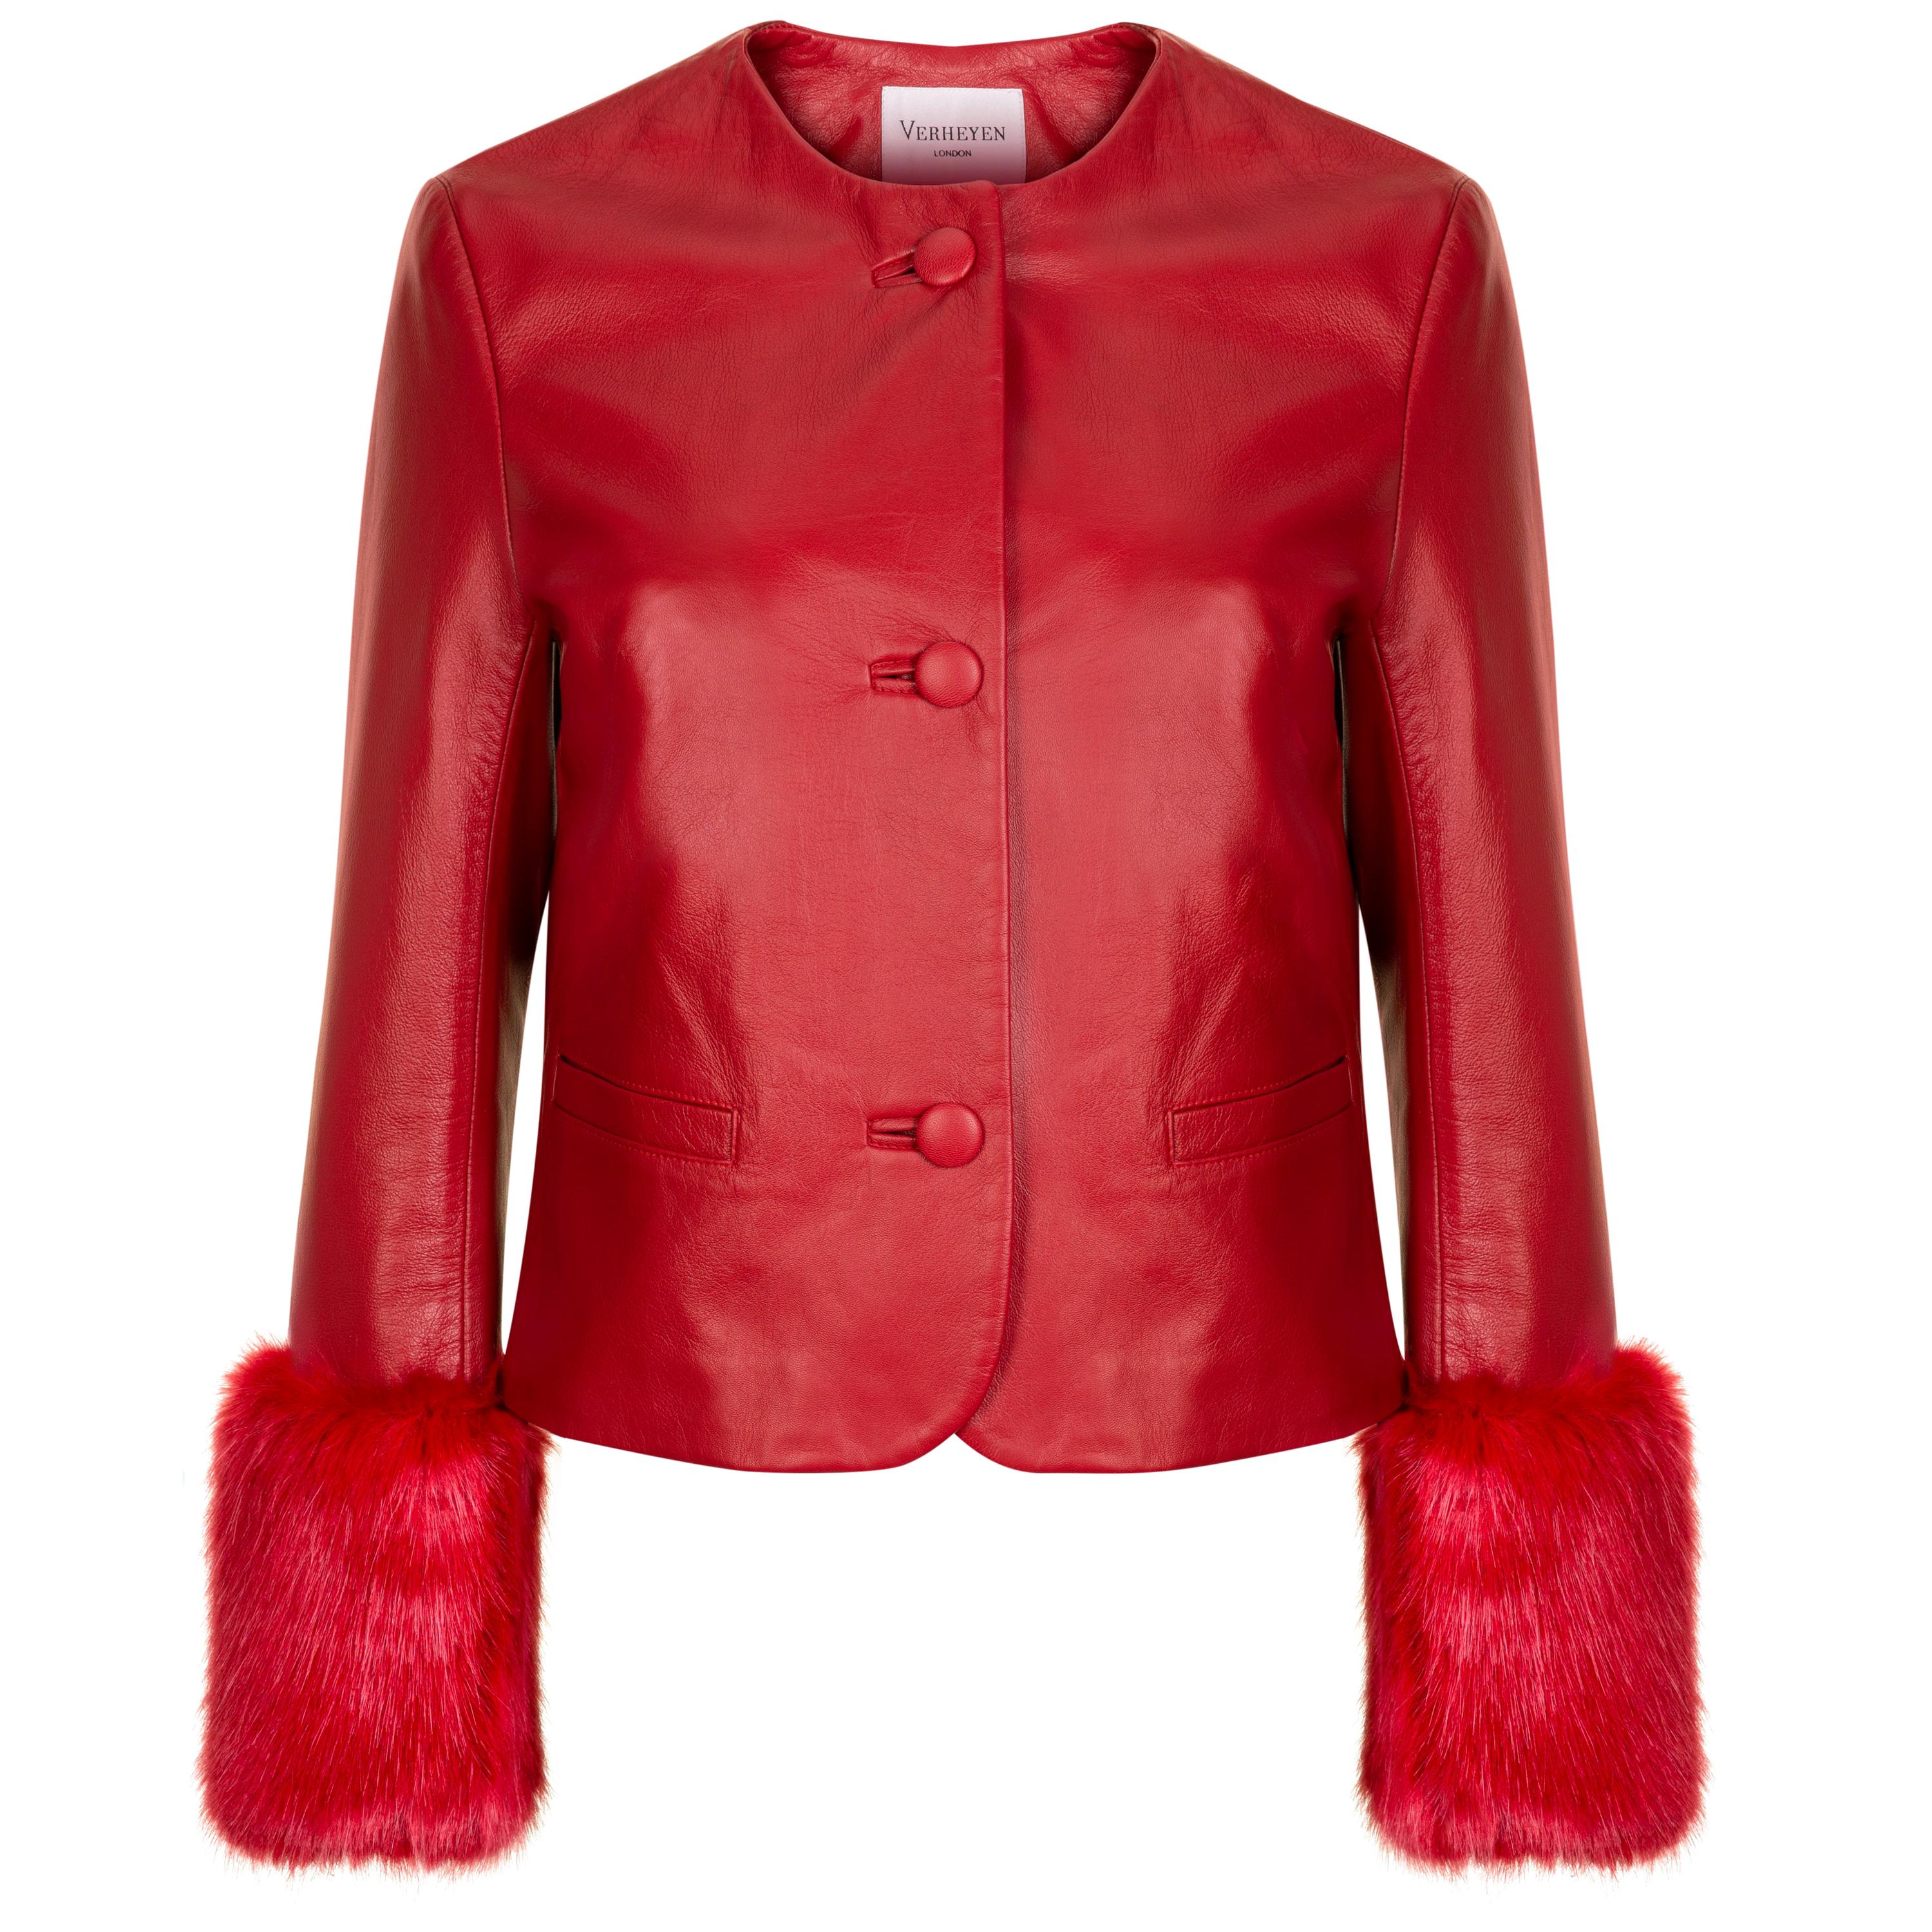 Verheyen Vita Cropped Jacket in Red Leather with Faux Fur - Size uk 12 For Sale